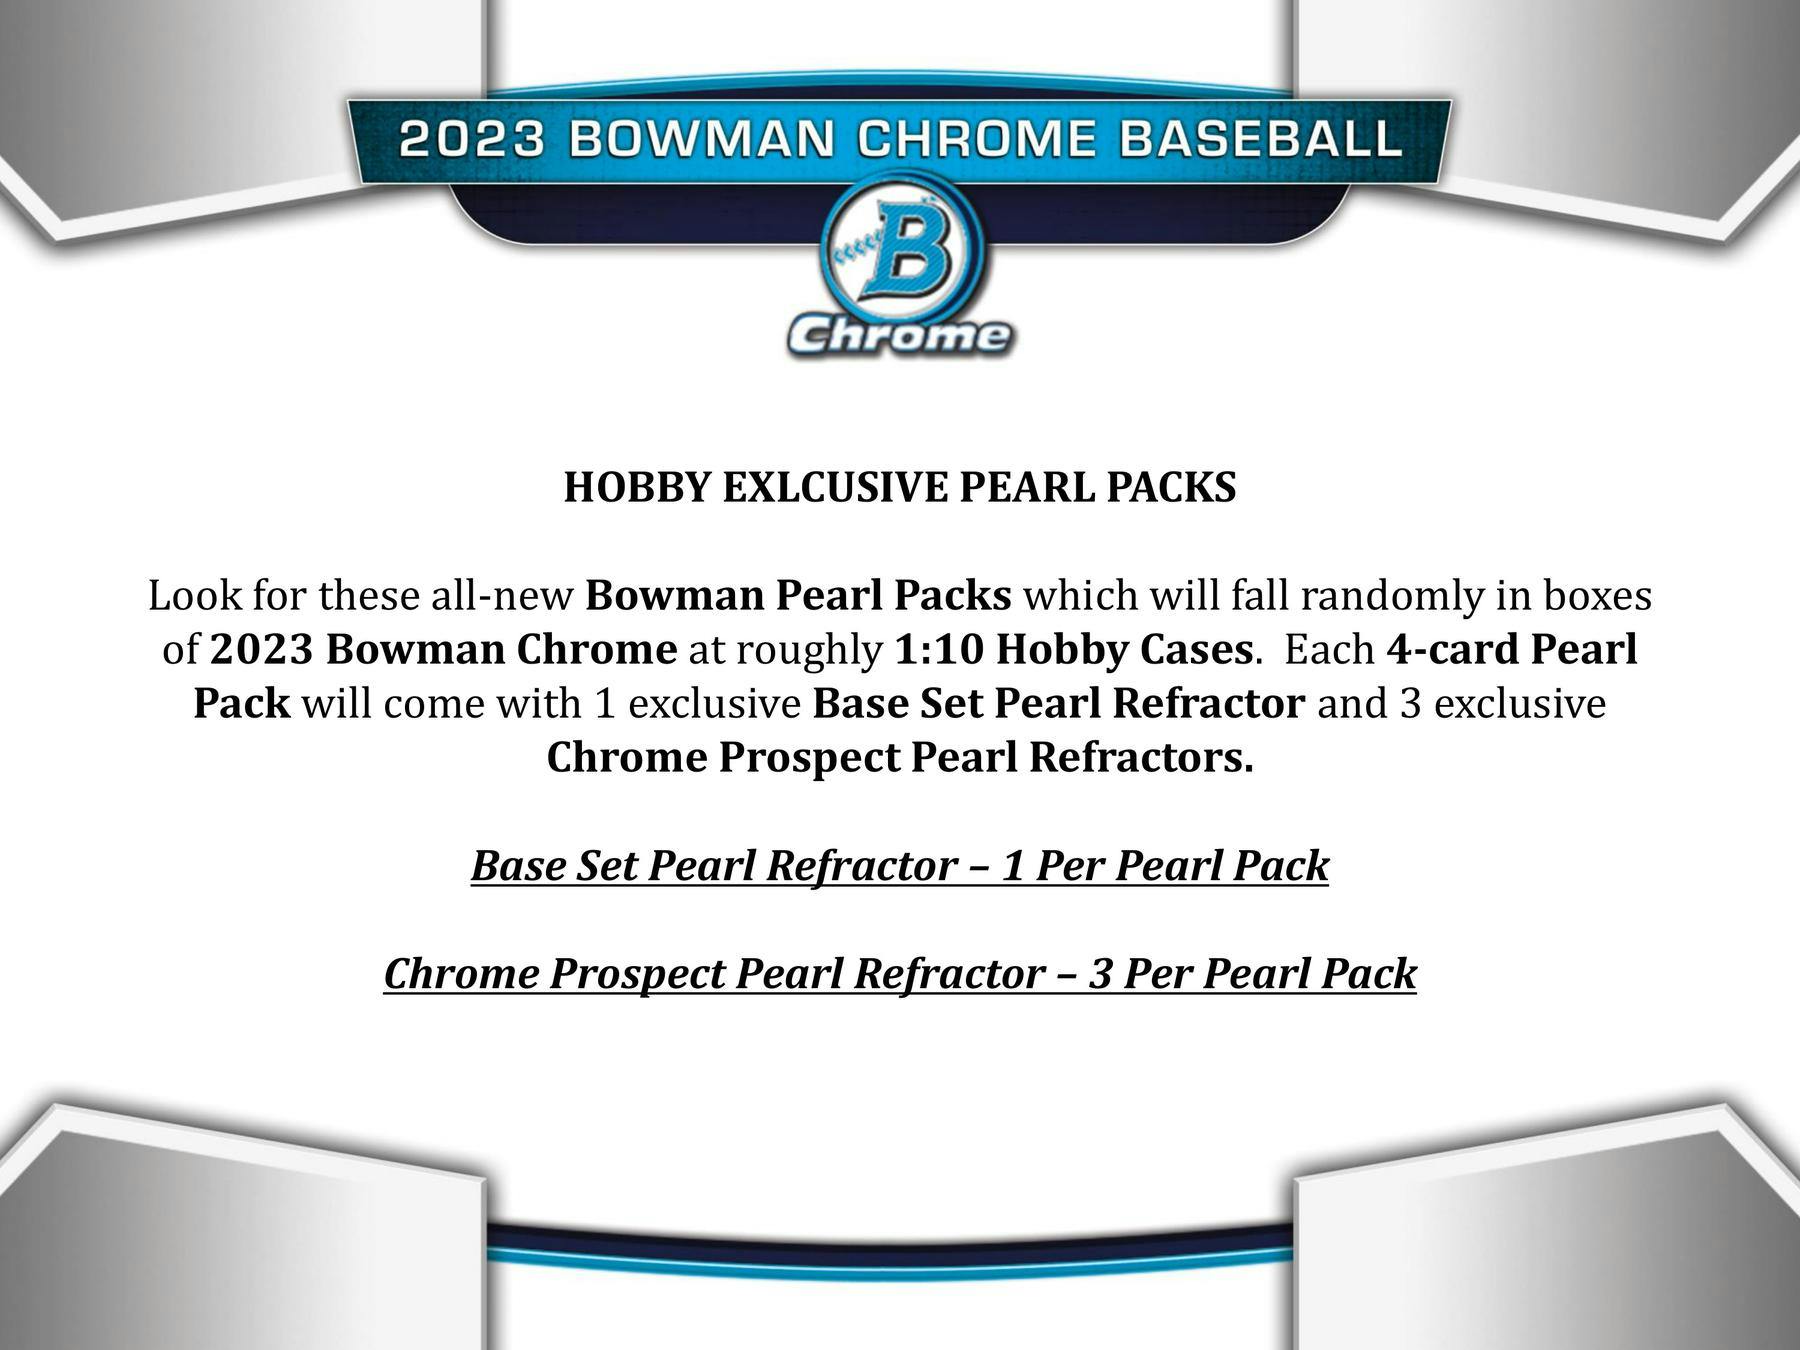 2023 Bowman Chrome Case came a couple days early. Opened six Hobby Boxes so  far. Quality control is about what you'd expect with one egregious card so  far (pictured along with a